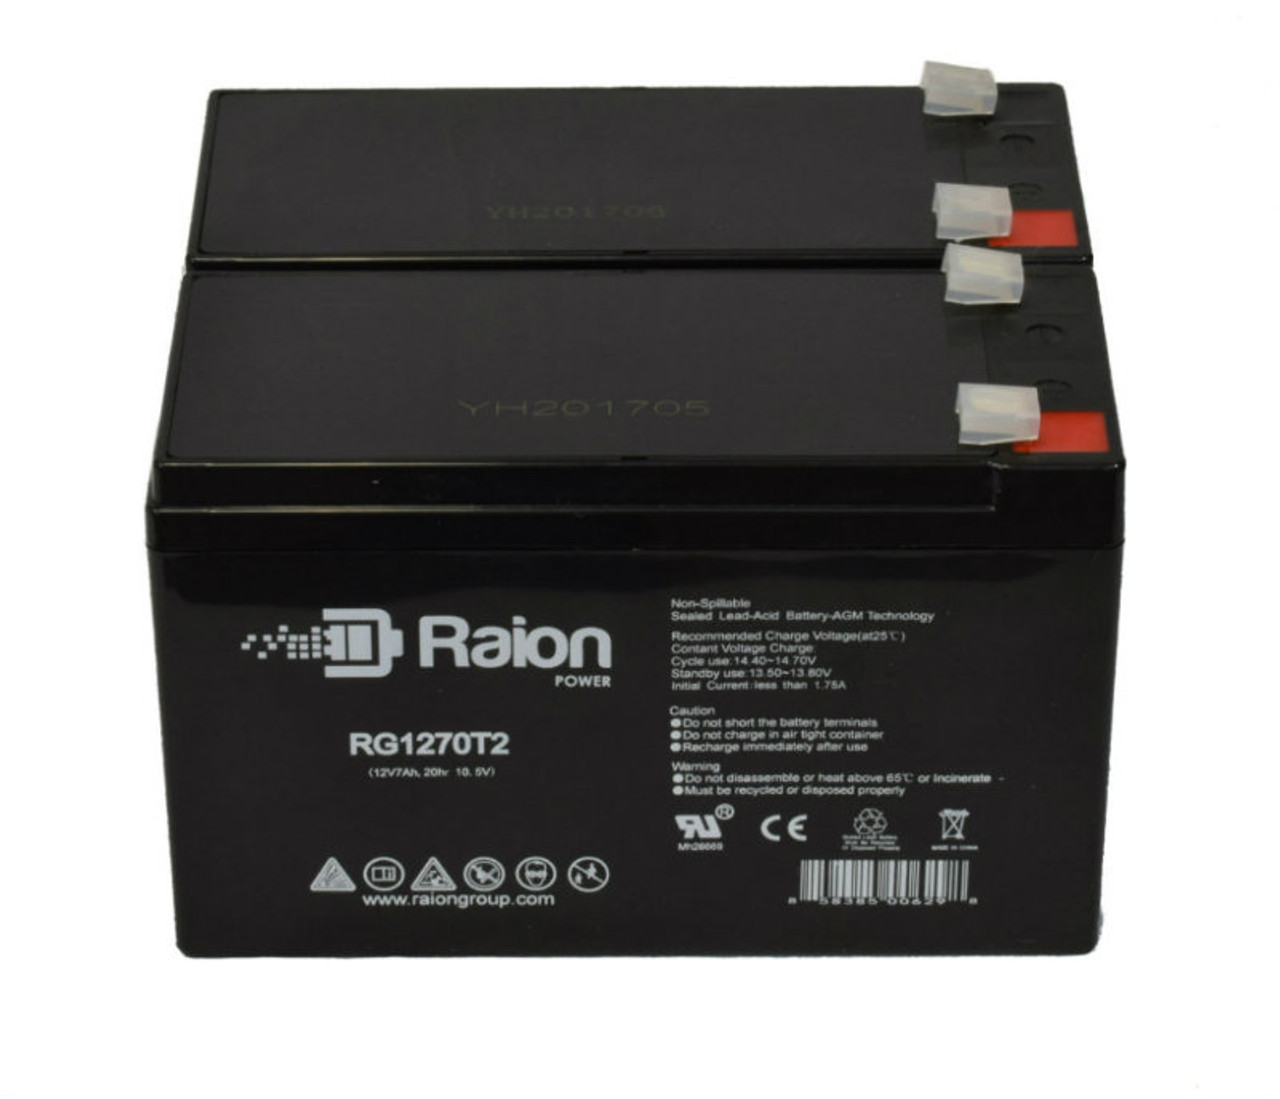 Raion Power Replacement 12V 7Ah Battery for VCELL 12VC7.0 - 2 Pack